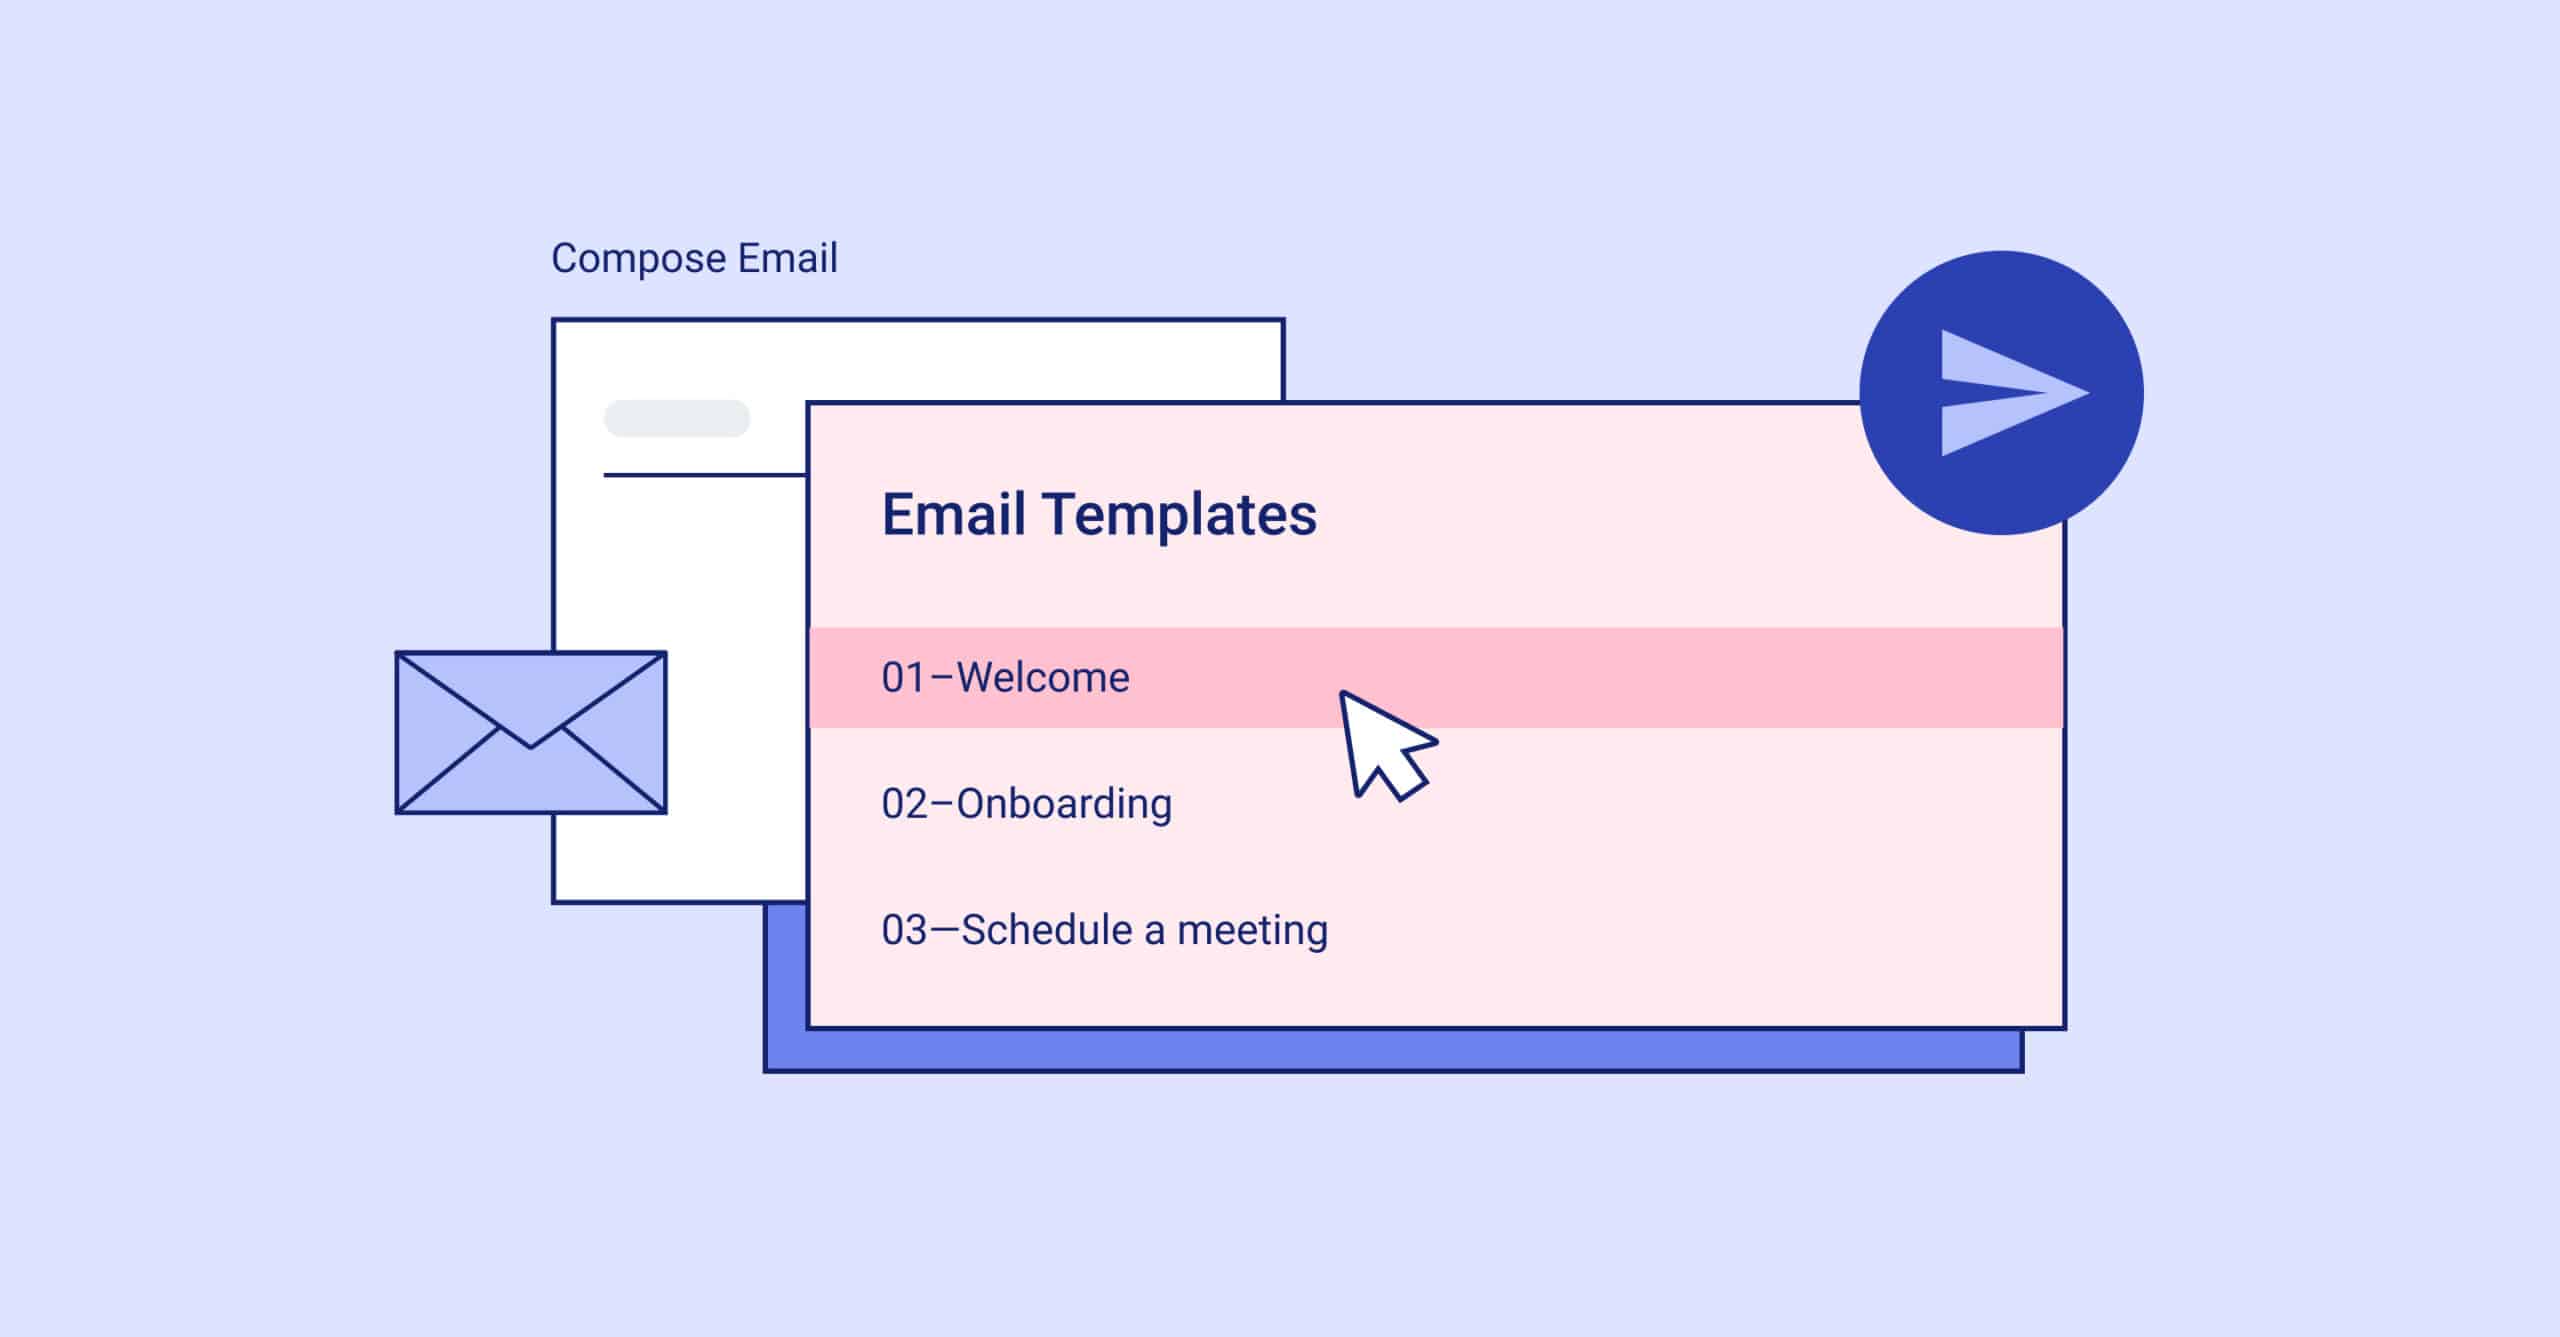 Create Templates for Common Responses: